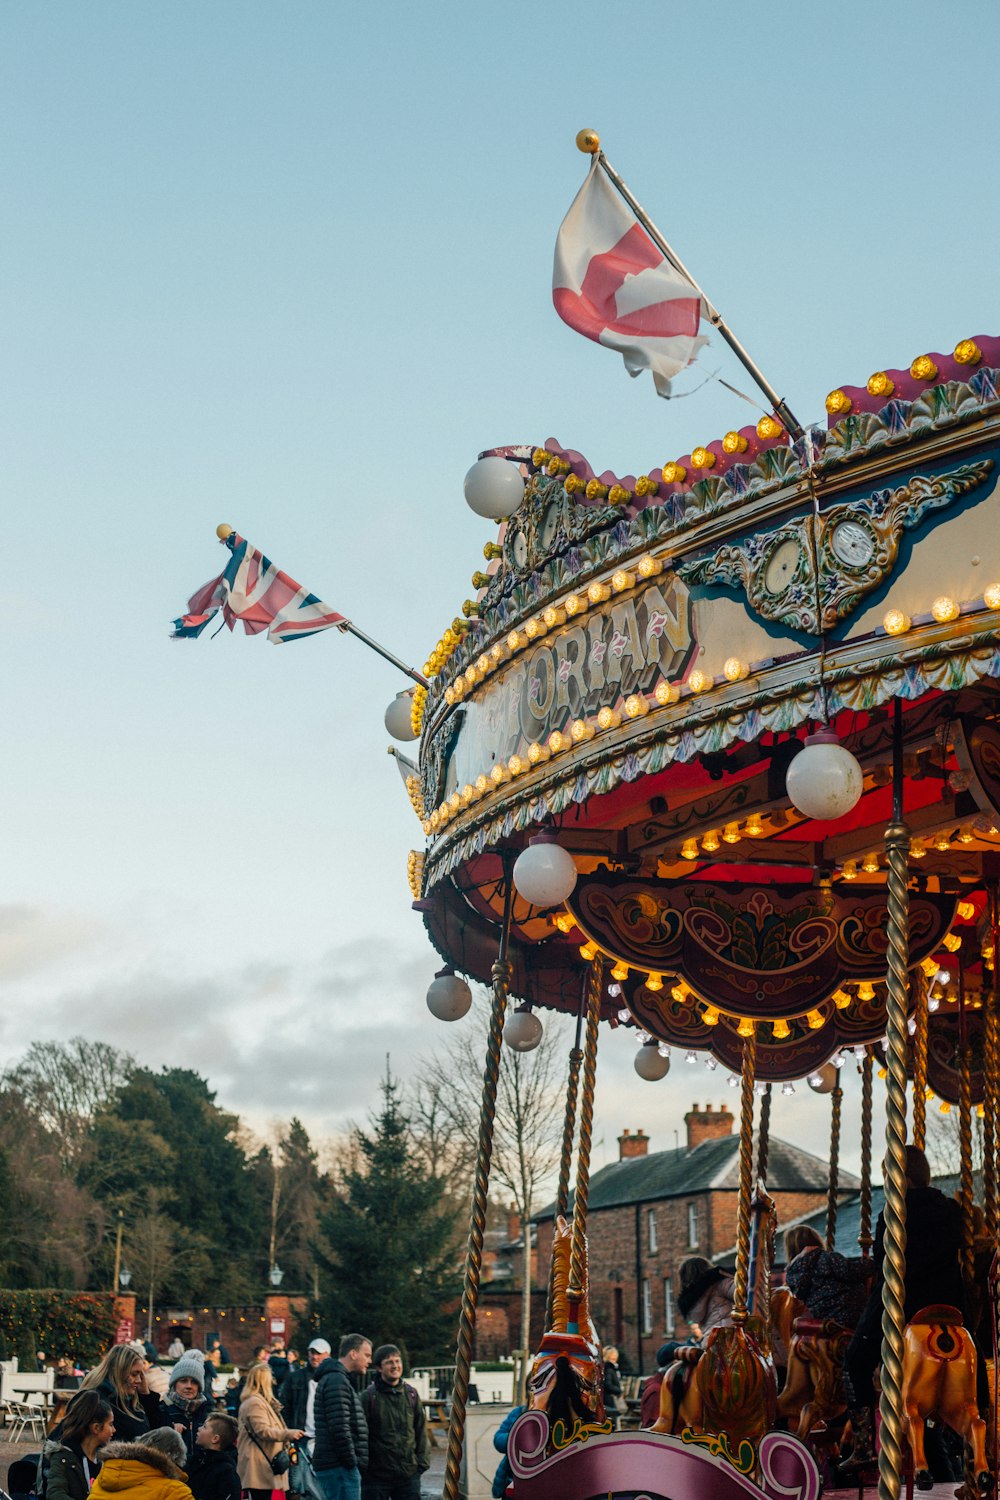 people around a carousel under a calm blue sky during daytime